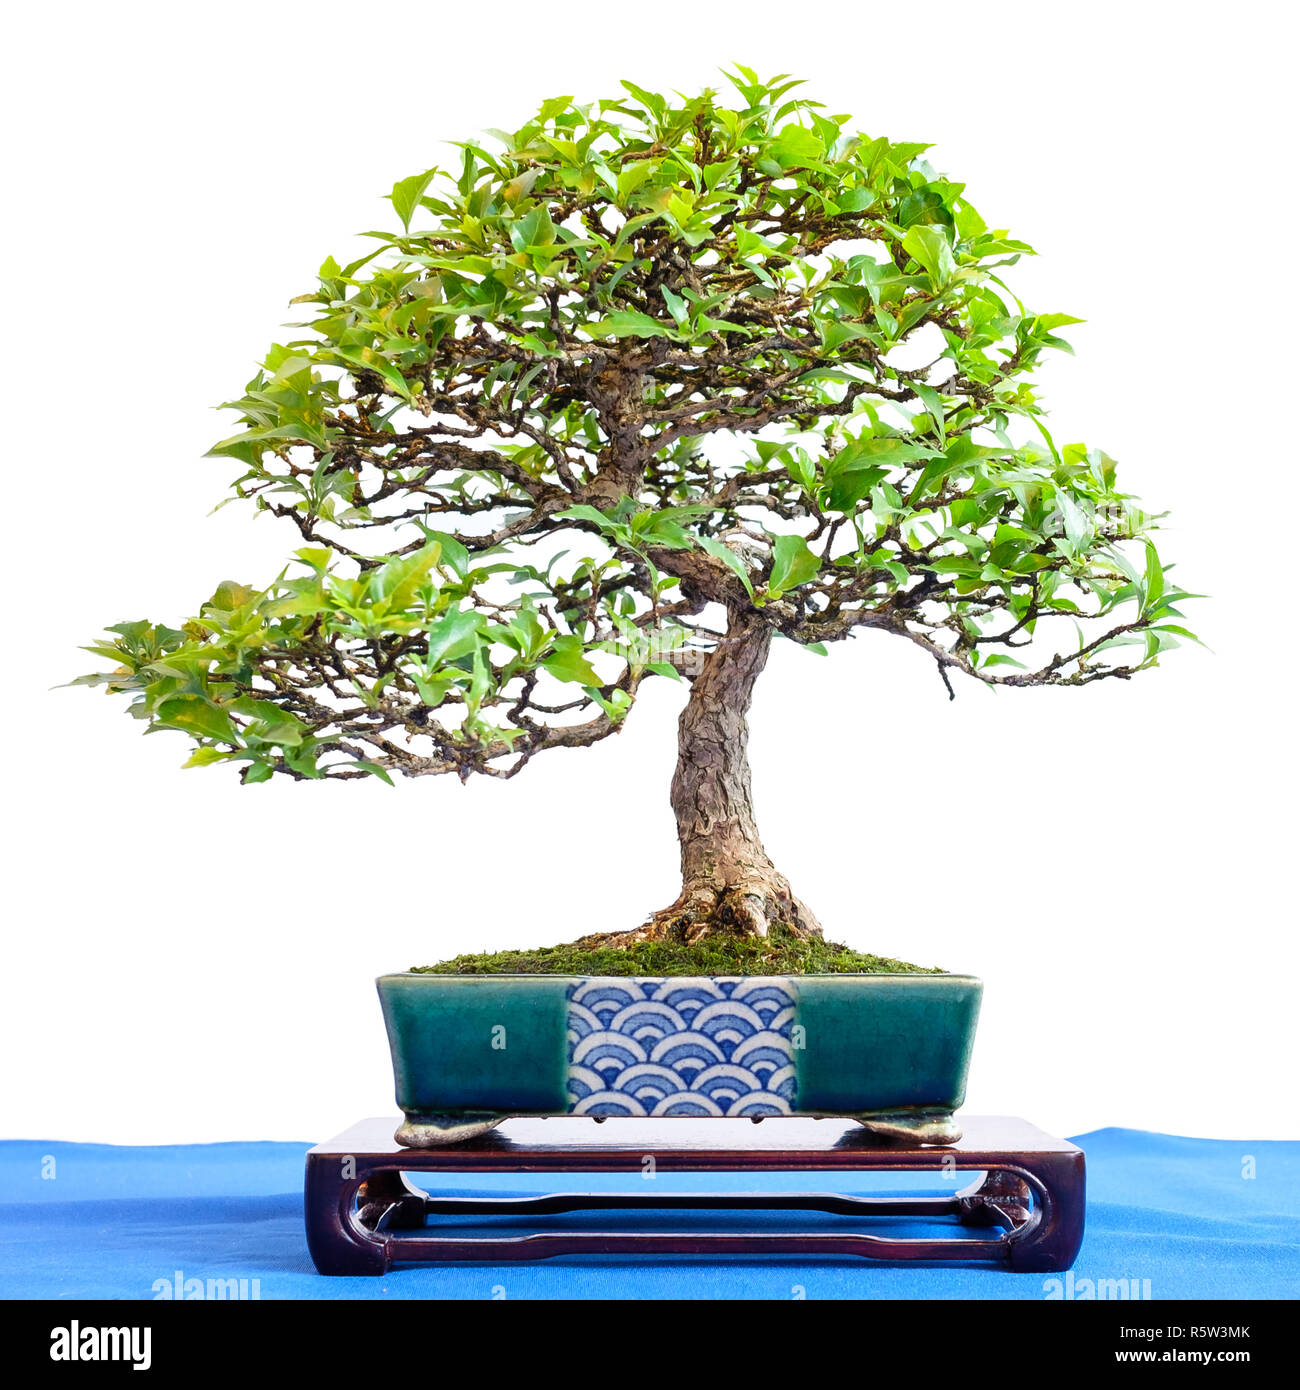 scented maple (premna japonica) as a small bonsai tree Stock Photo